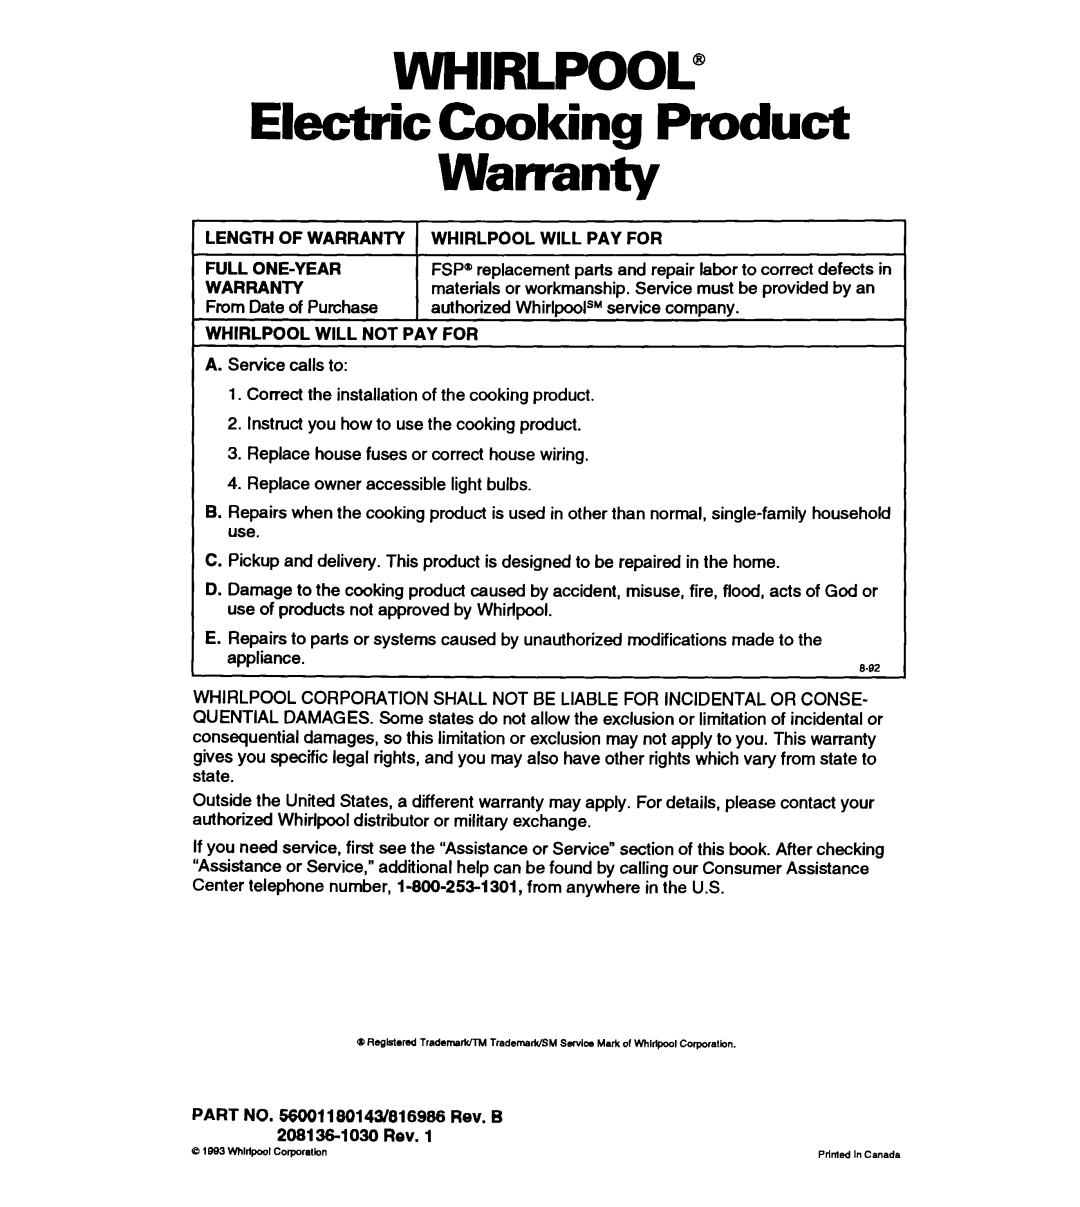 Whirlpool RS363PXY manual WHIRLPOOL@ Electric Cooking Product Warranty, LENGTH OF WARRANTY 1 WHIRLPOOL WILL PAY FOR 